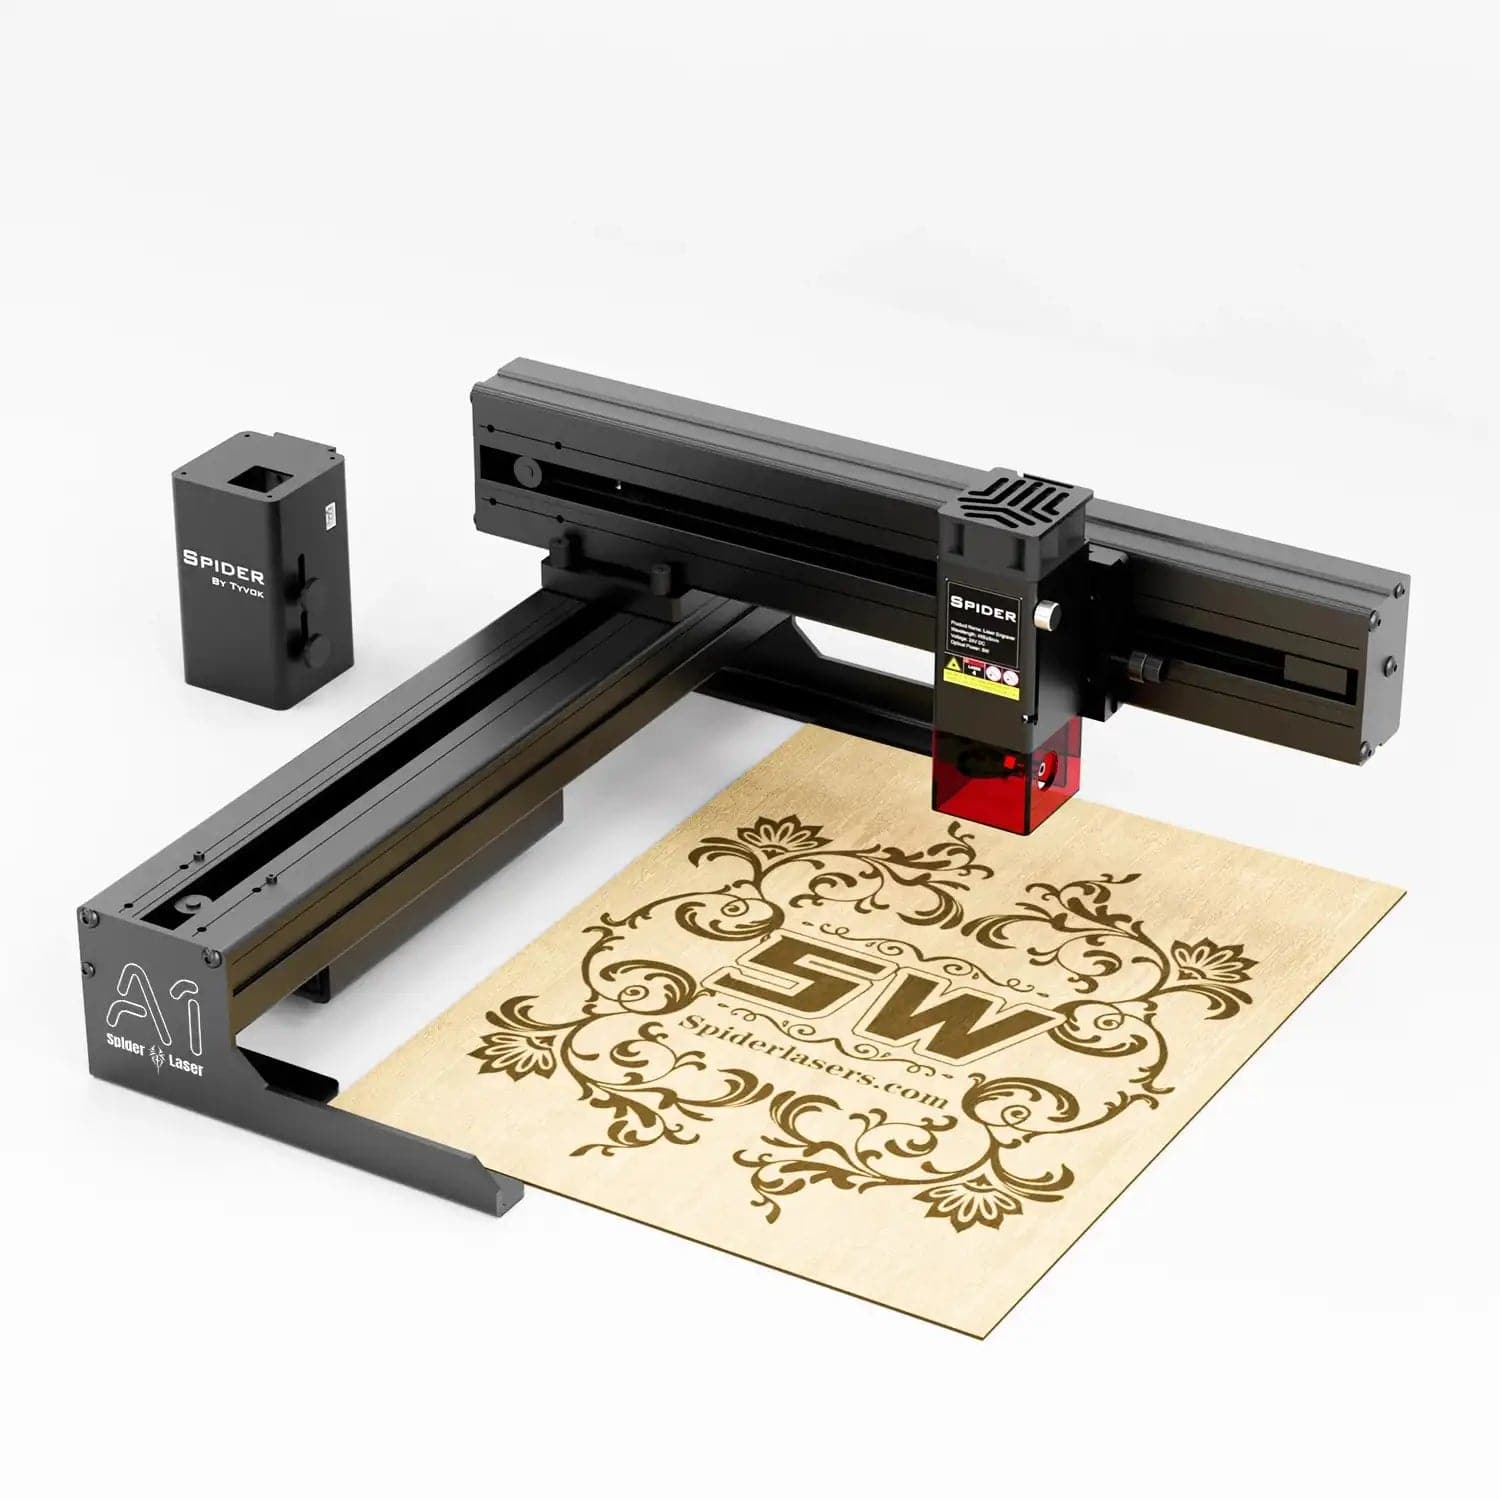 Tyvok Spider A1 Laser Engraver & Cutter 5W/10W
Compact and easy to place Foldable and requires no installation.
Product integration, no external cables Support 5W, 10W and 20W laser engraving.
Supports artist LiTyvok Spider A1 Laser Engraver & Cutter 5W/10WLaser Engraving and Cutting